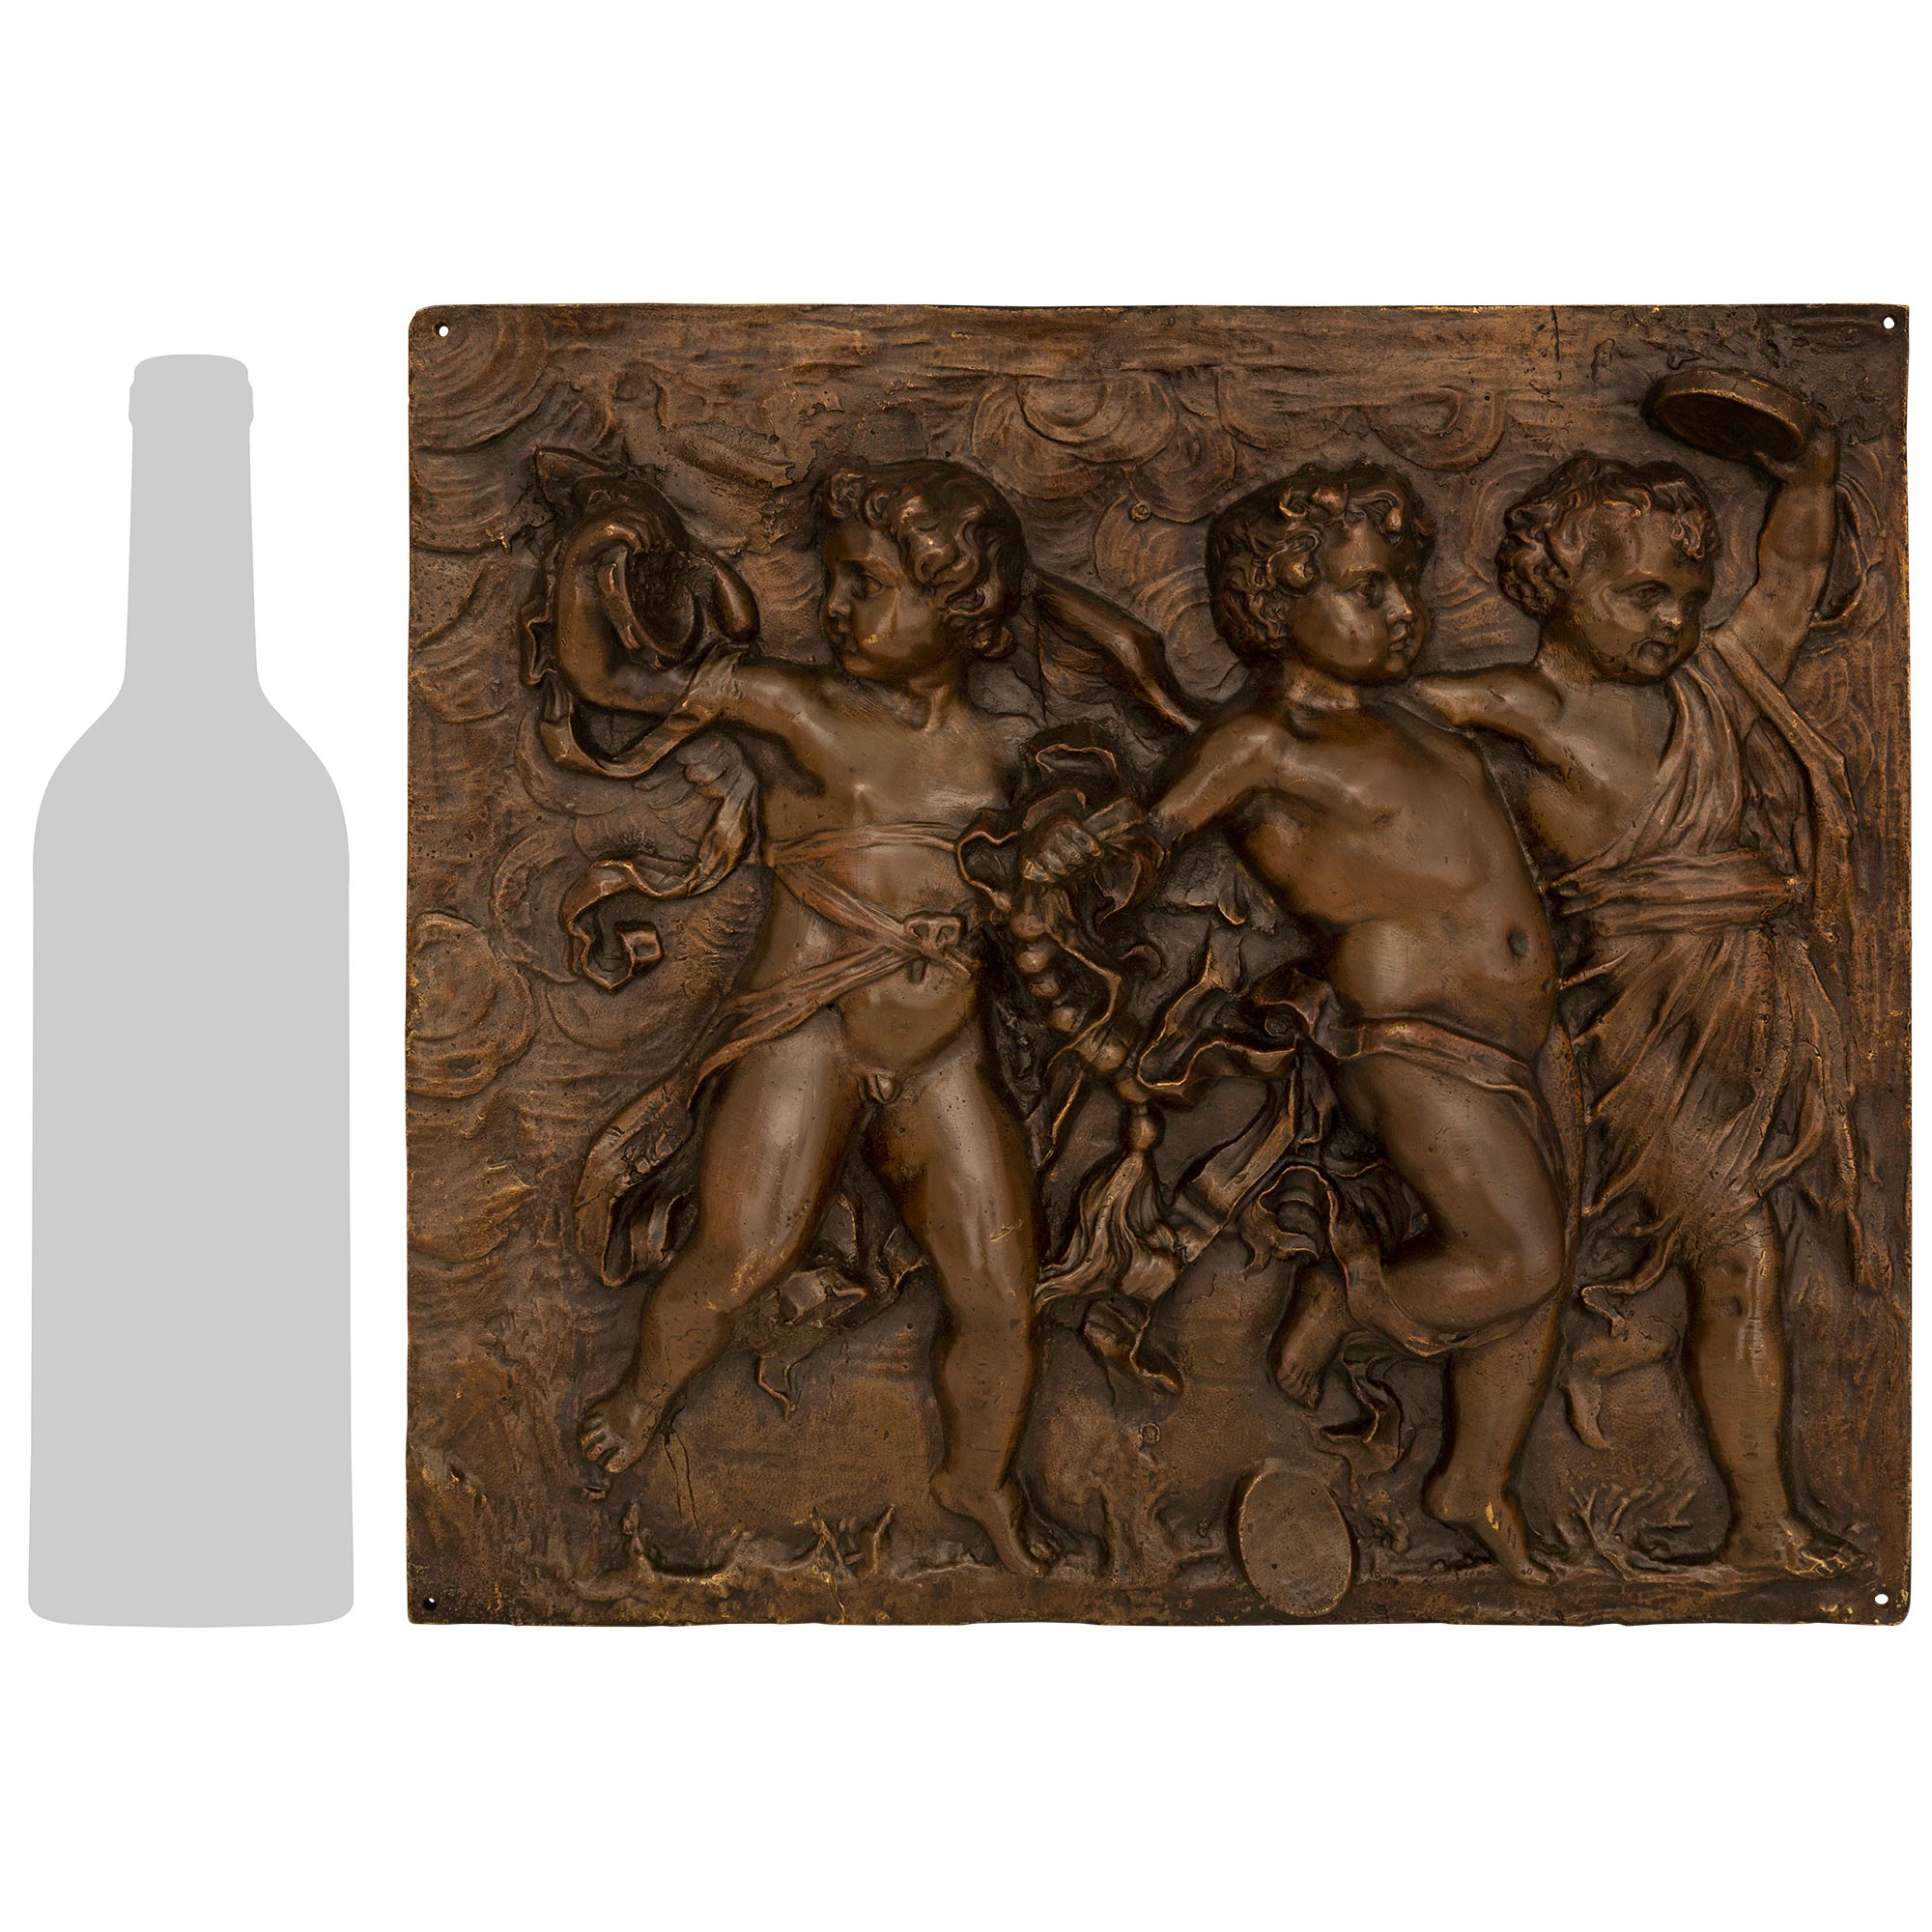 A charming and most decorative pair of French 19th century Louis XVI st. patinated bronze wall plaques in the manner of Clodion. Each rectangular plaque depicts charming winged cherubs draped in wonderful flowing ribbons and garments joyously